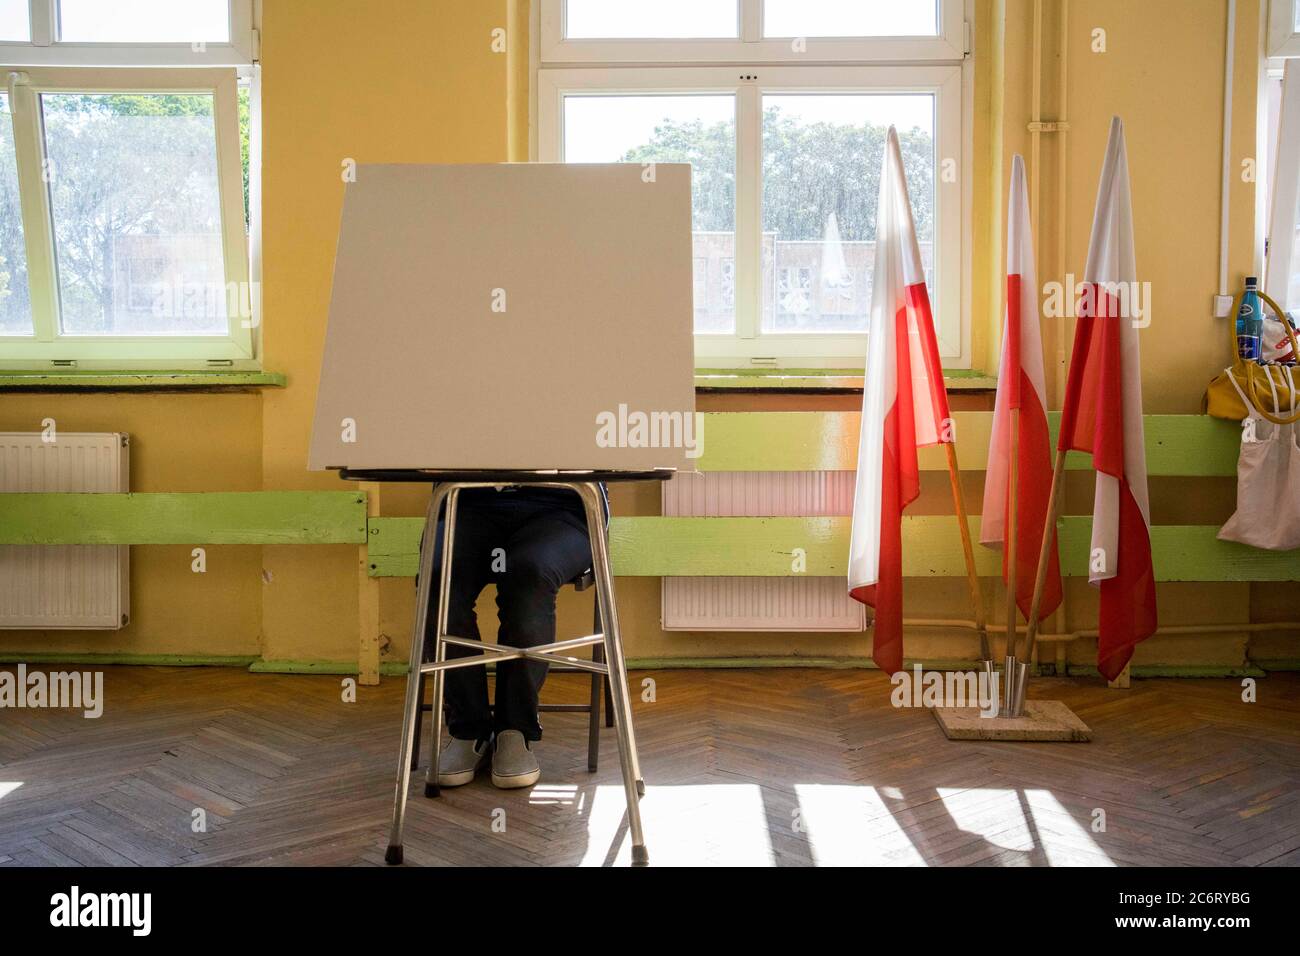 Poznan, Wielkopolska, Poland. 12th July, 2020. The second - decisive - round of the presidential election in Poland began at 7 am and will last until 9 pm. In the picture: the voting person in the polling station. The publication in the negative context is forbidden. Credit: Dawid Tatarkiewicz/ZUMA Wire/Alamy Live News Stock Photo